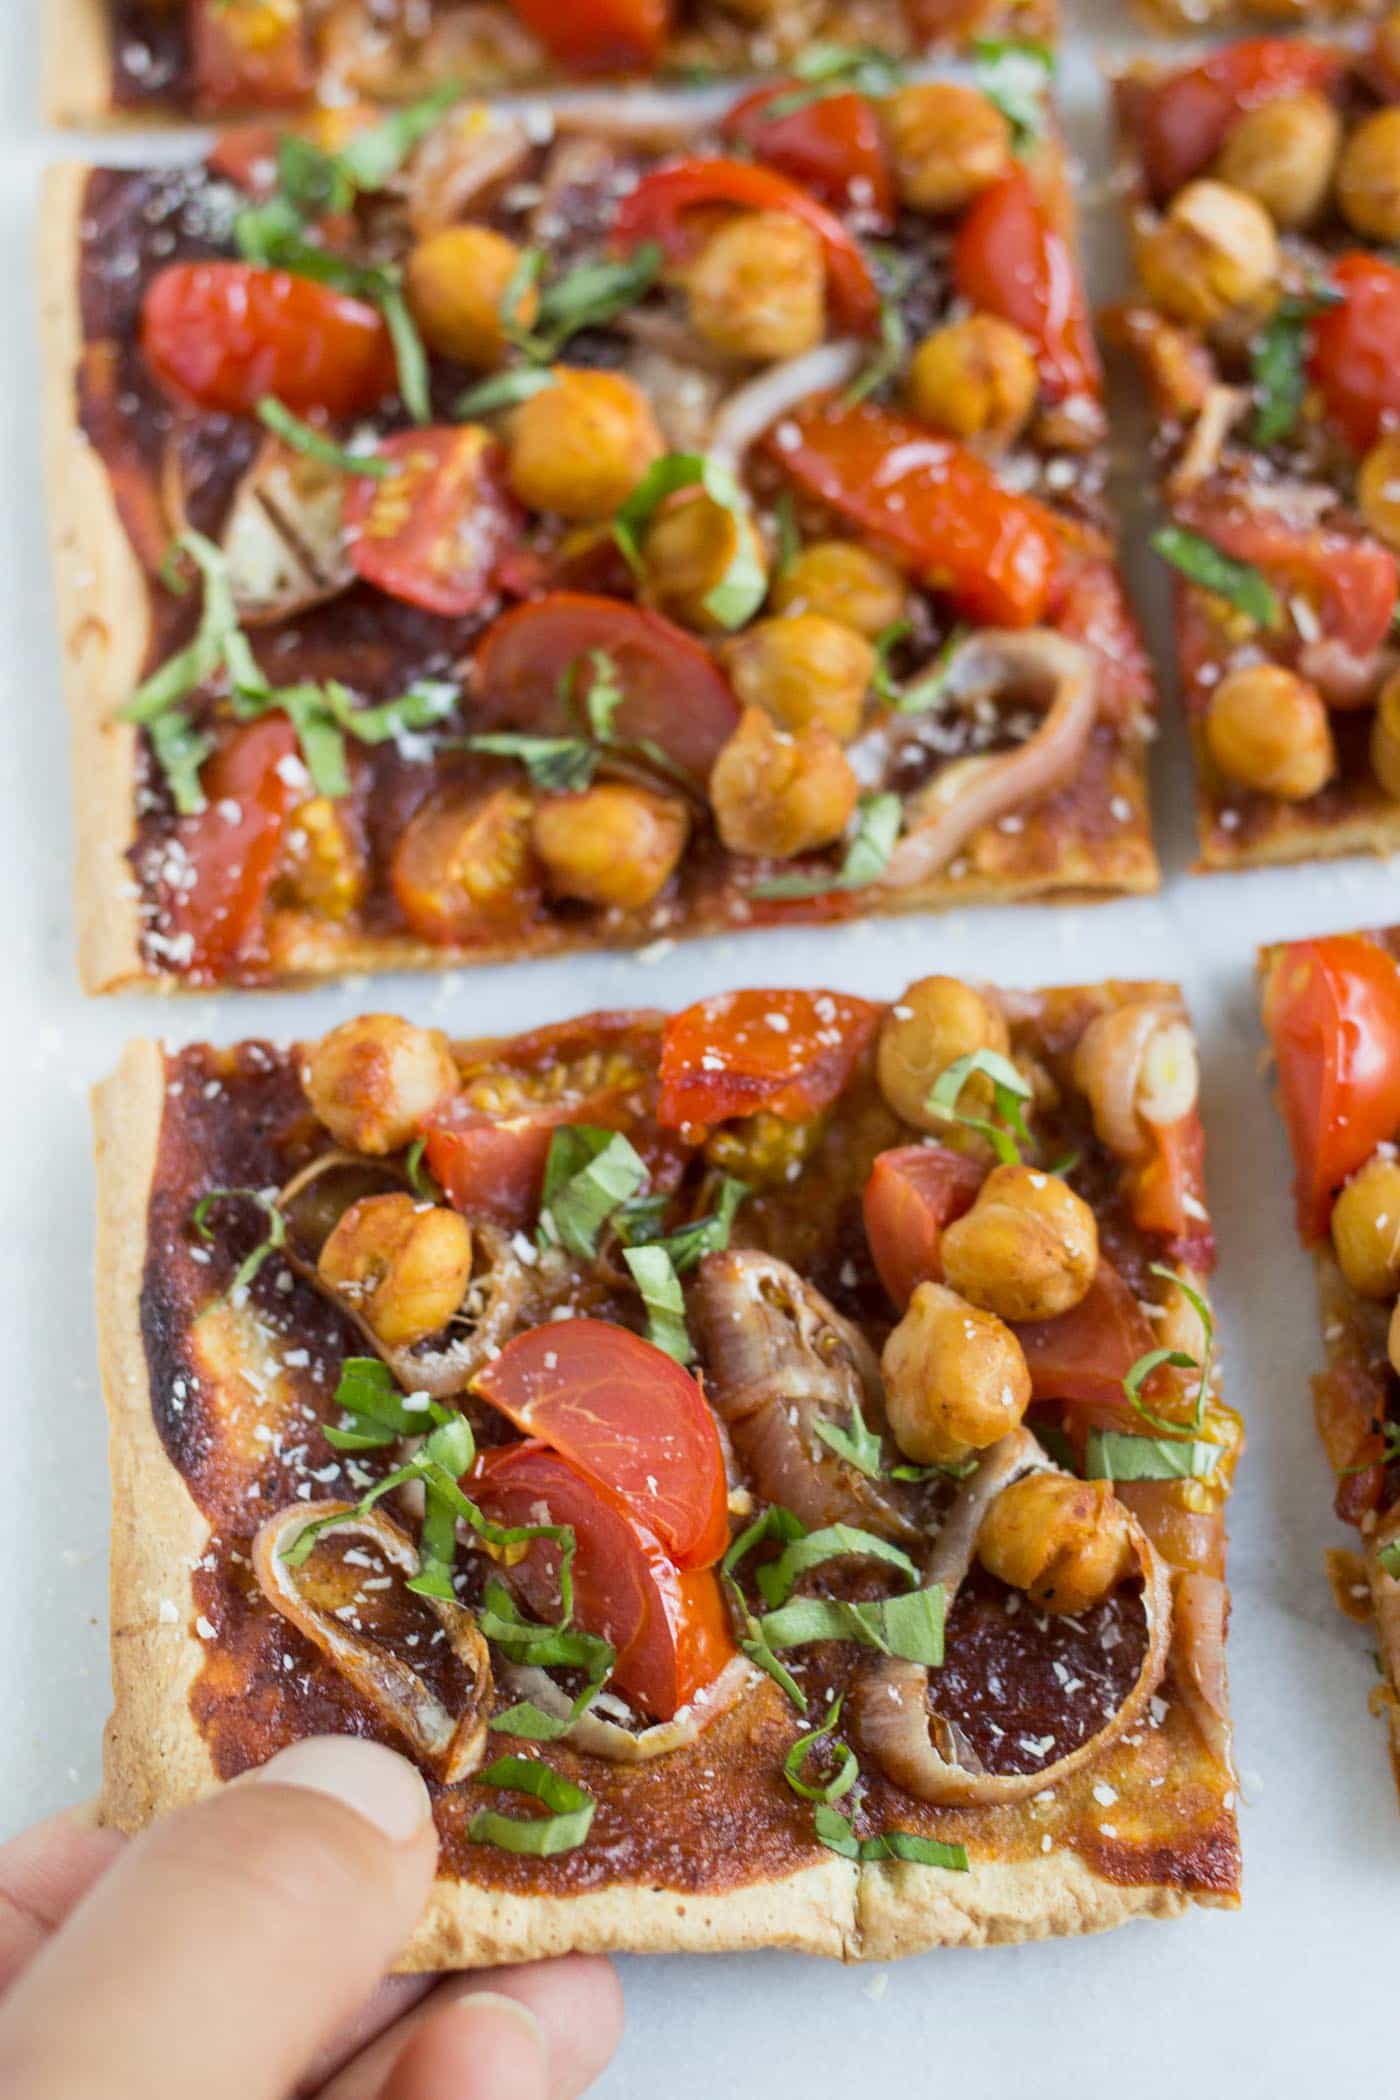 QUINOA PIZZA!! a thin and crispy crust that is make with just quinoa! holds up to all kinds of toppings too!